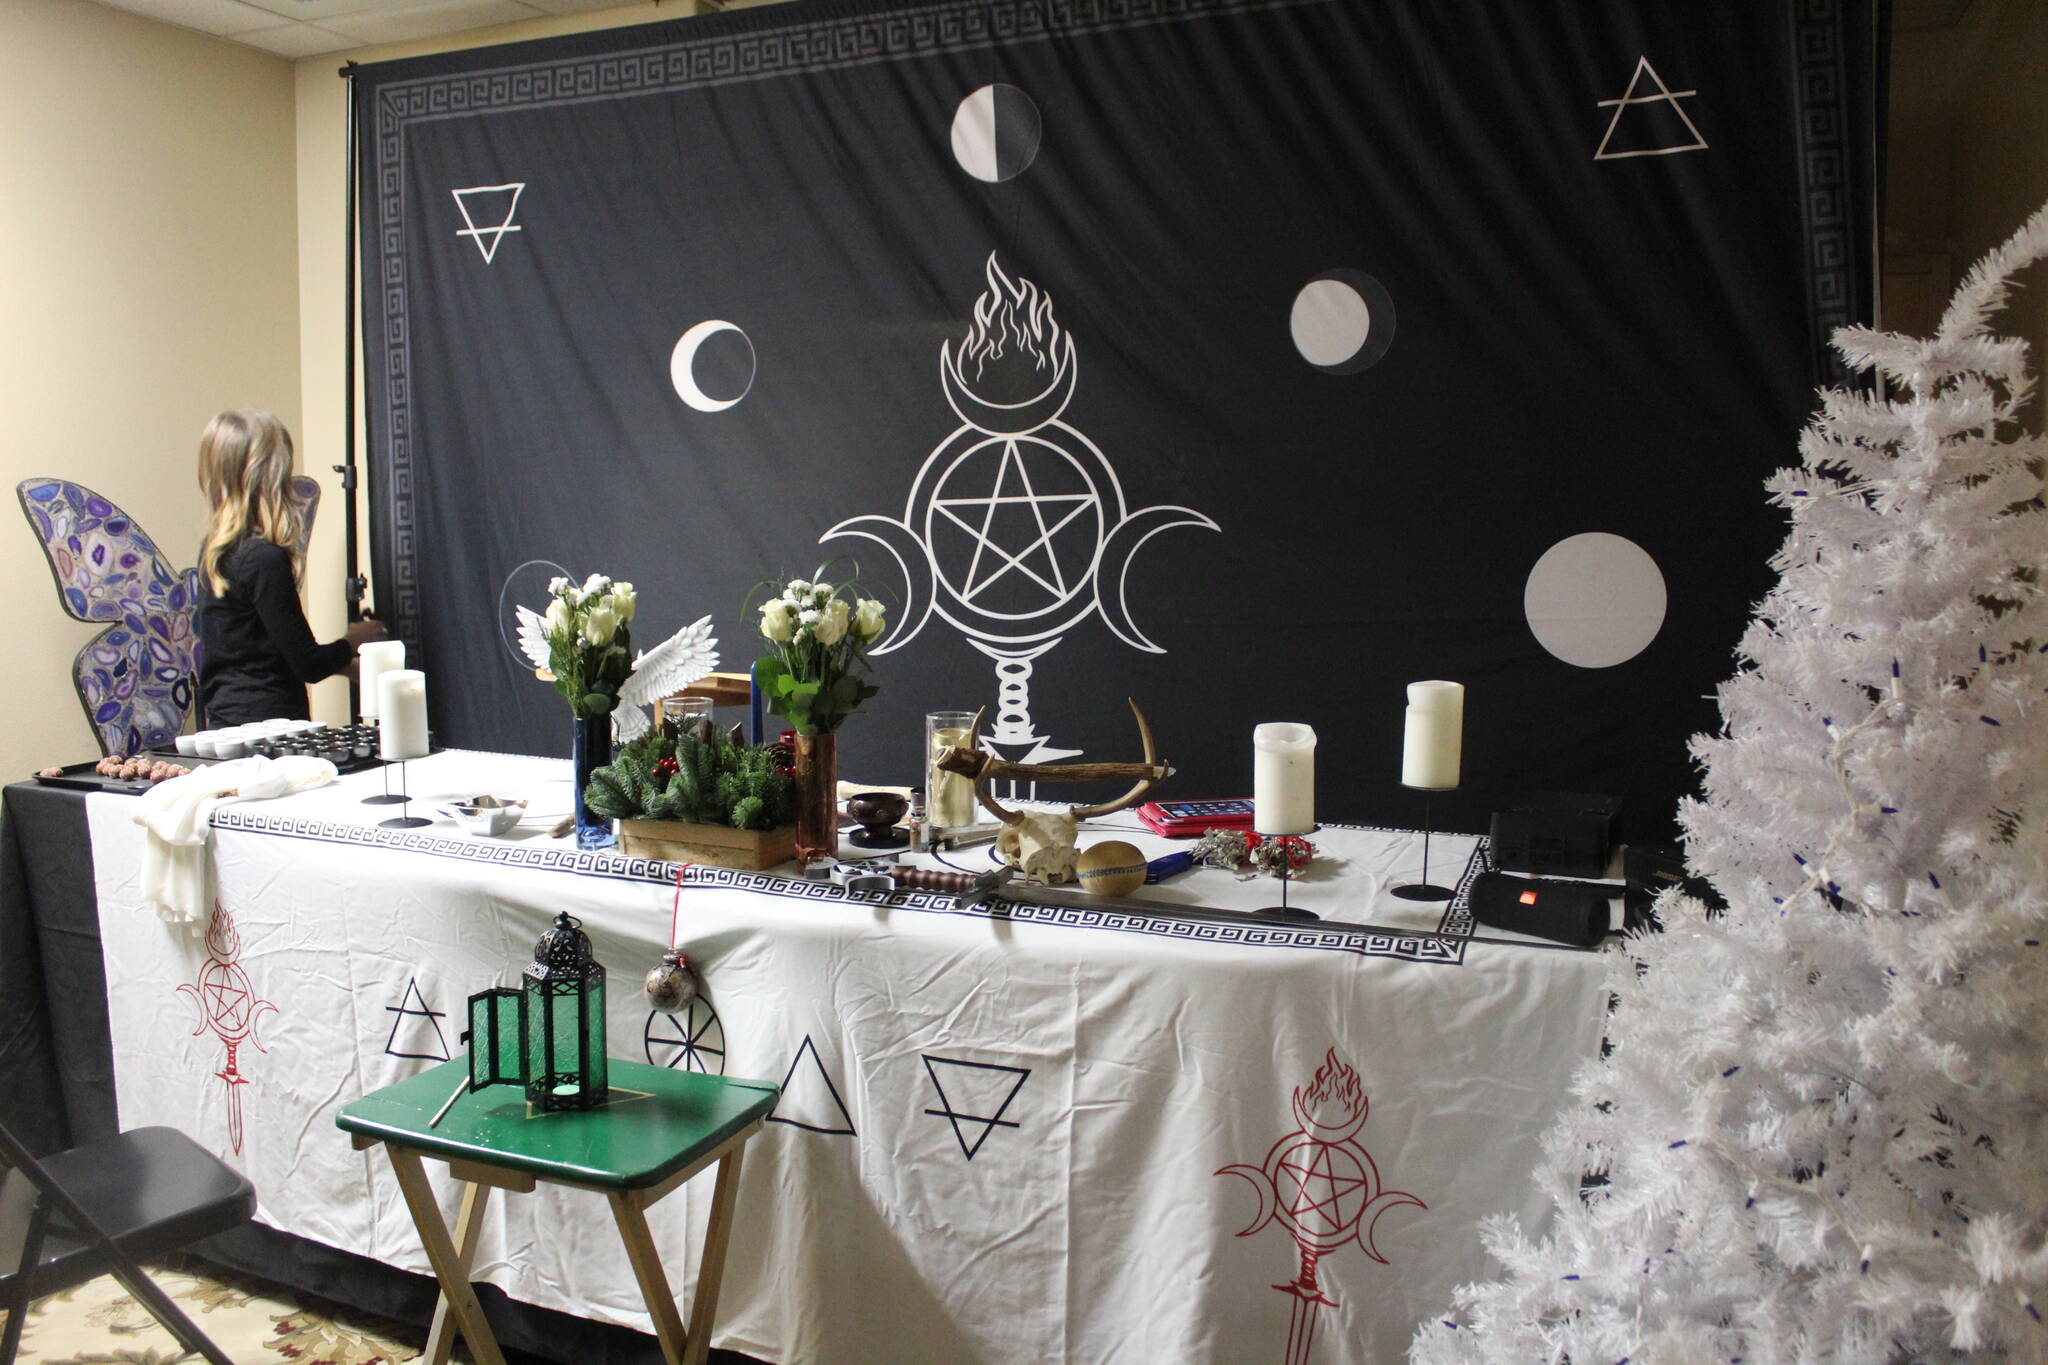 Leading up to the Yule rituals, decorations were put up and altars were erected. The coven's backdrop centers its personal sigil, the lunar cycle and elemental symbols. Photo by Bailey Jo Josie/Sound Publishing.